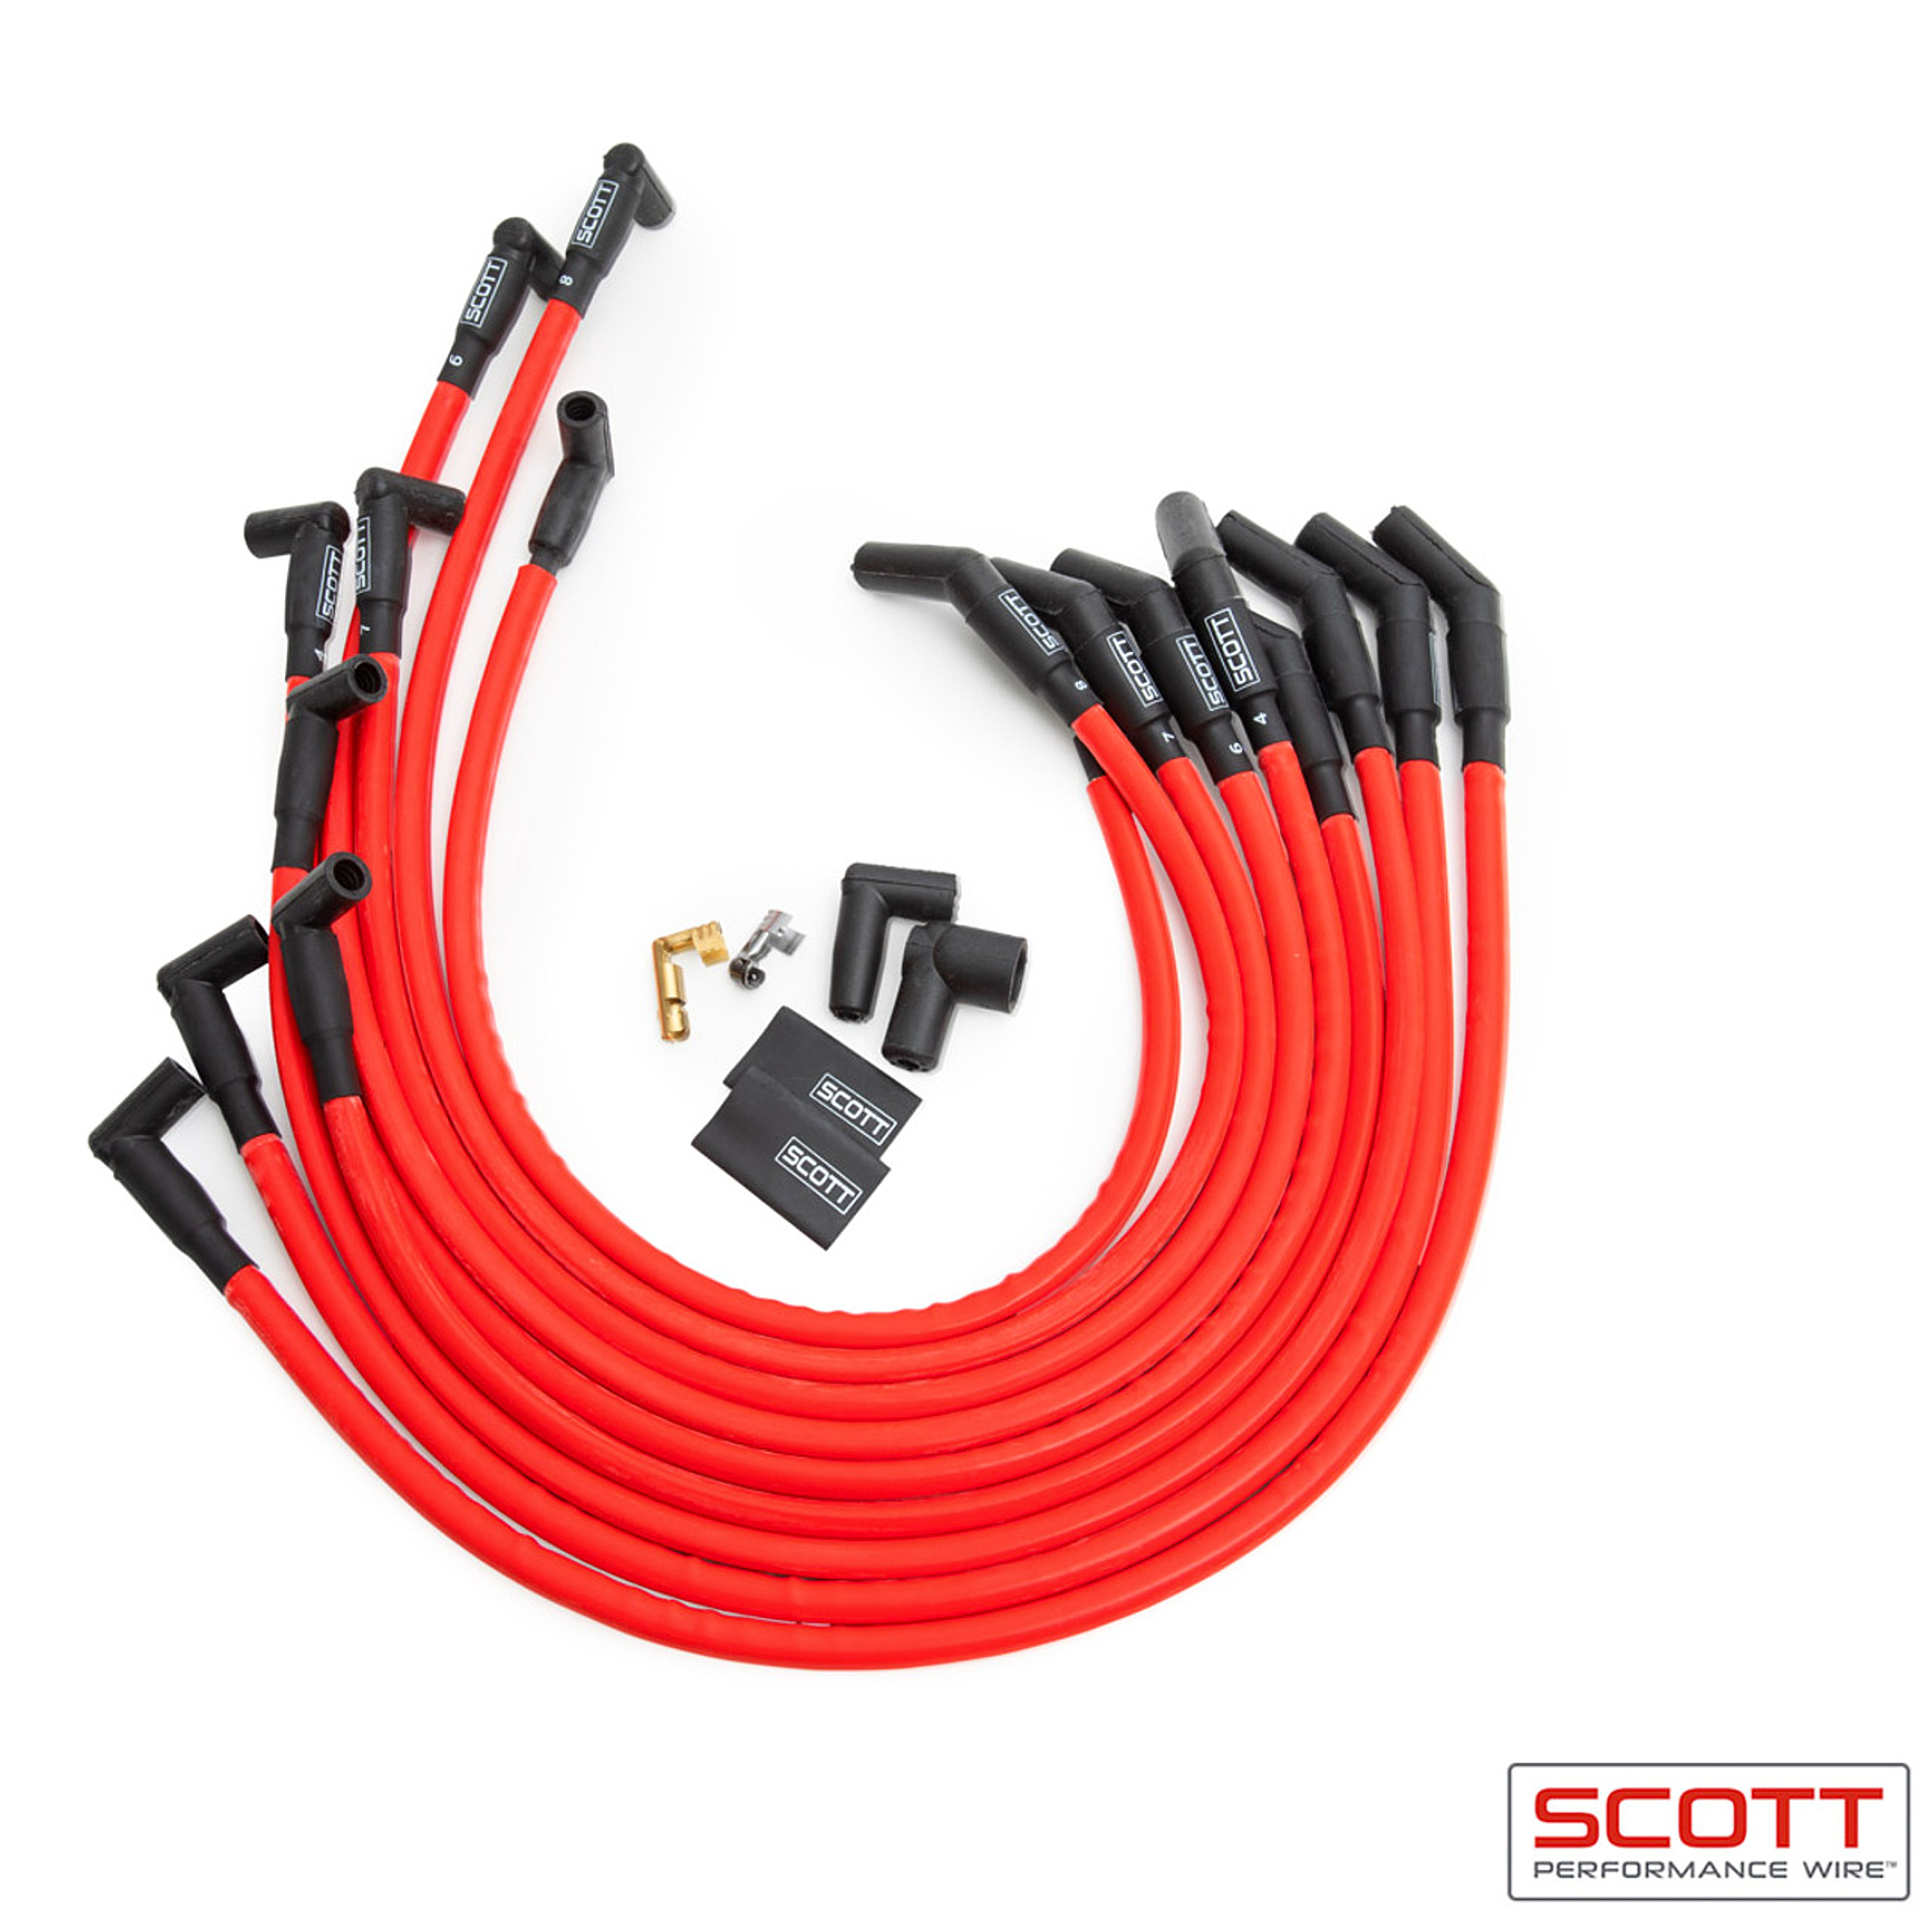 Scott Performance Wire CH-415-2 Spark Plug Wire Set, High Performance, Spiral Core, 10 mm, Red, 90 Degree Plug Boots, HEI Style, Over Headers, Big Block Chevy, Kit